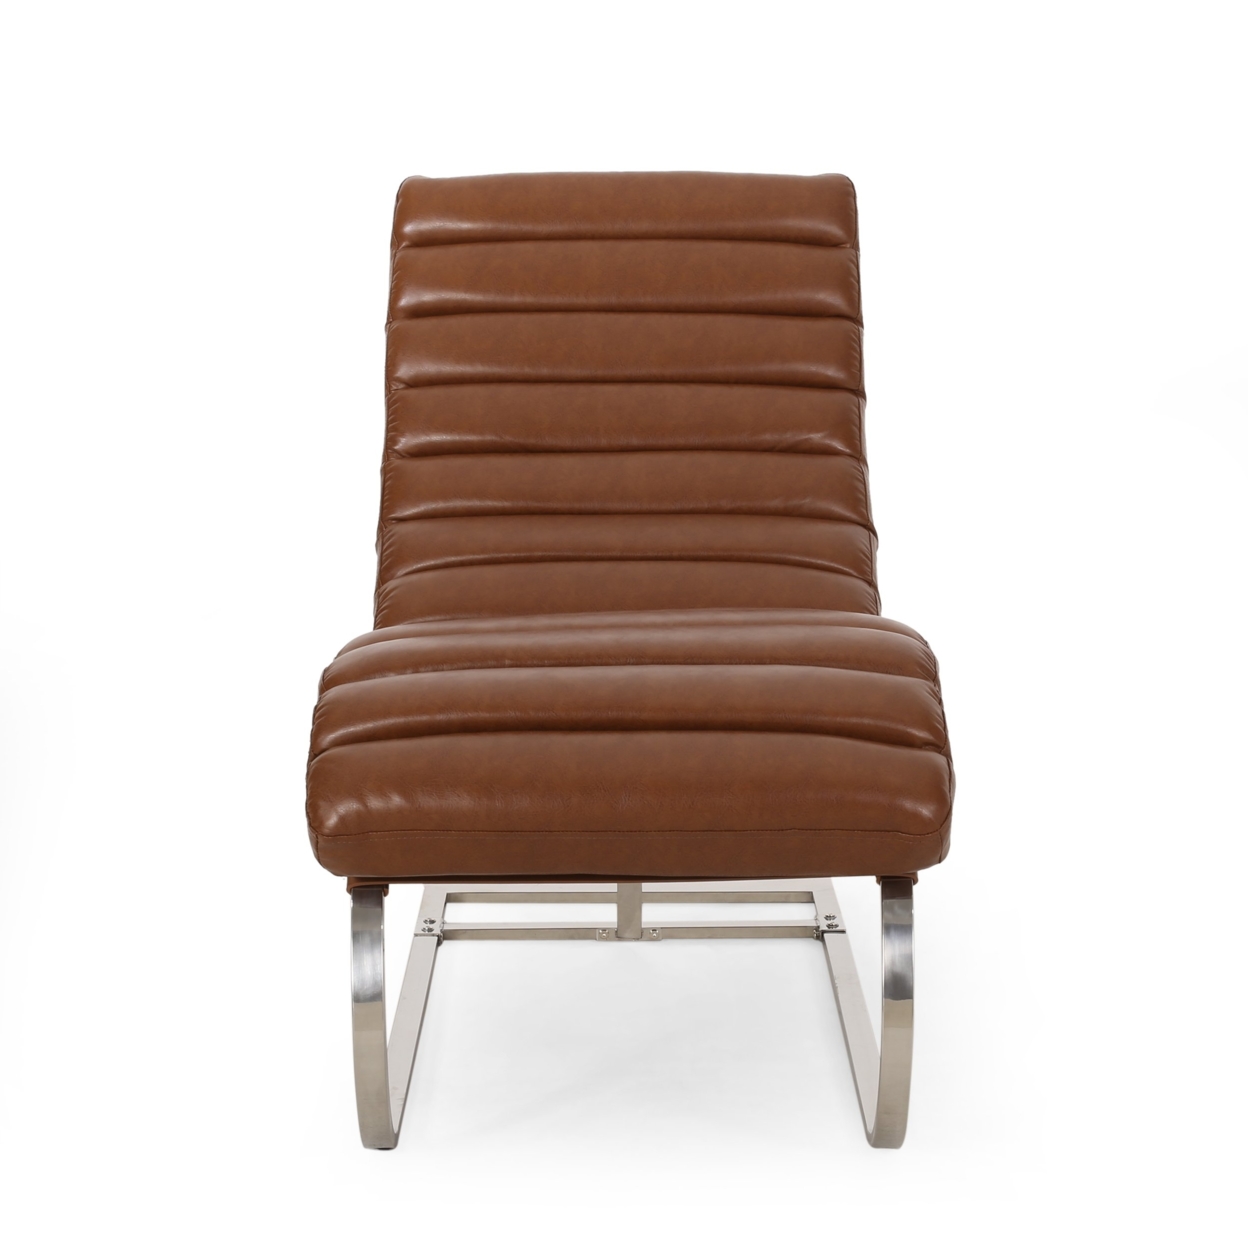 Pearsall Modern Channel Stitch Chaise Lounge - Cognac Brown + Silver